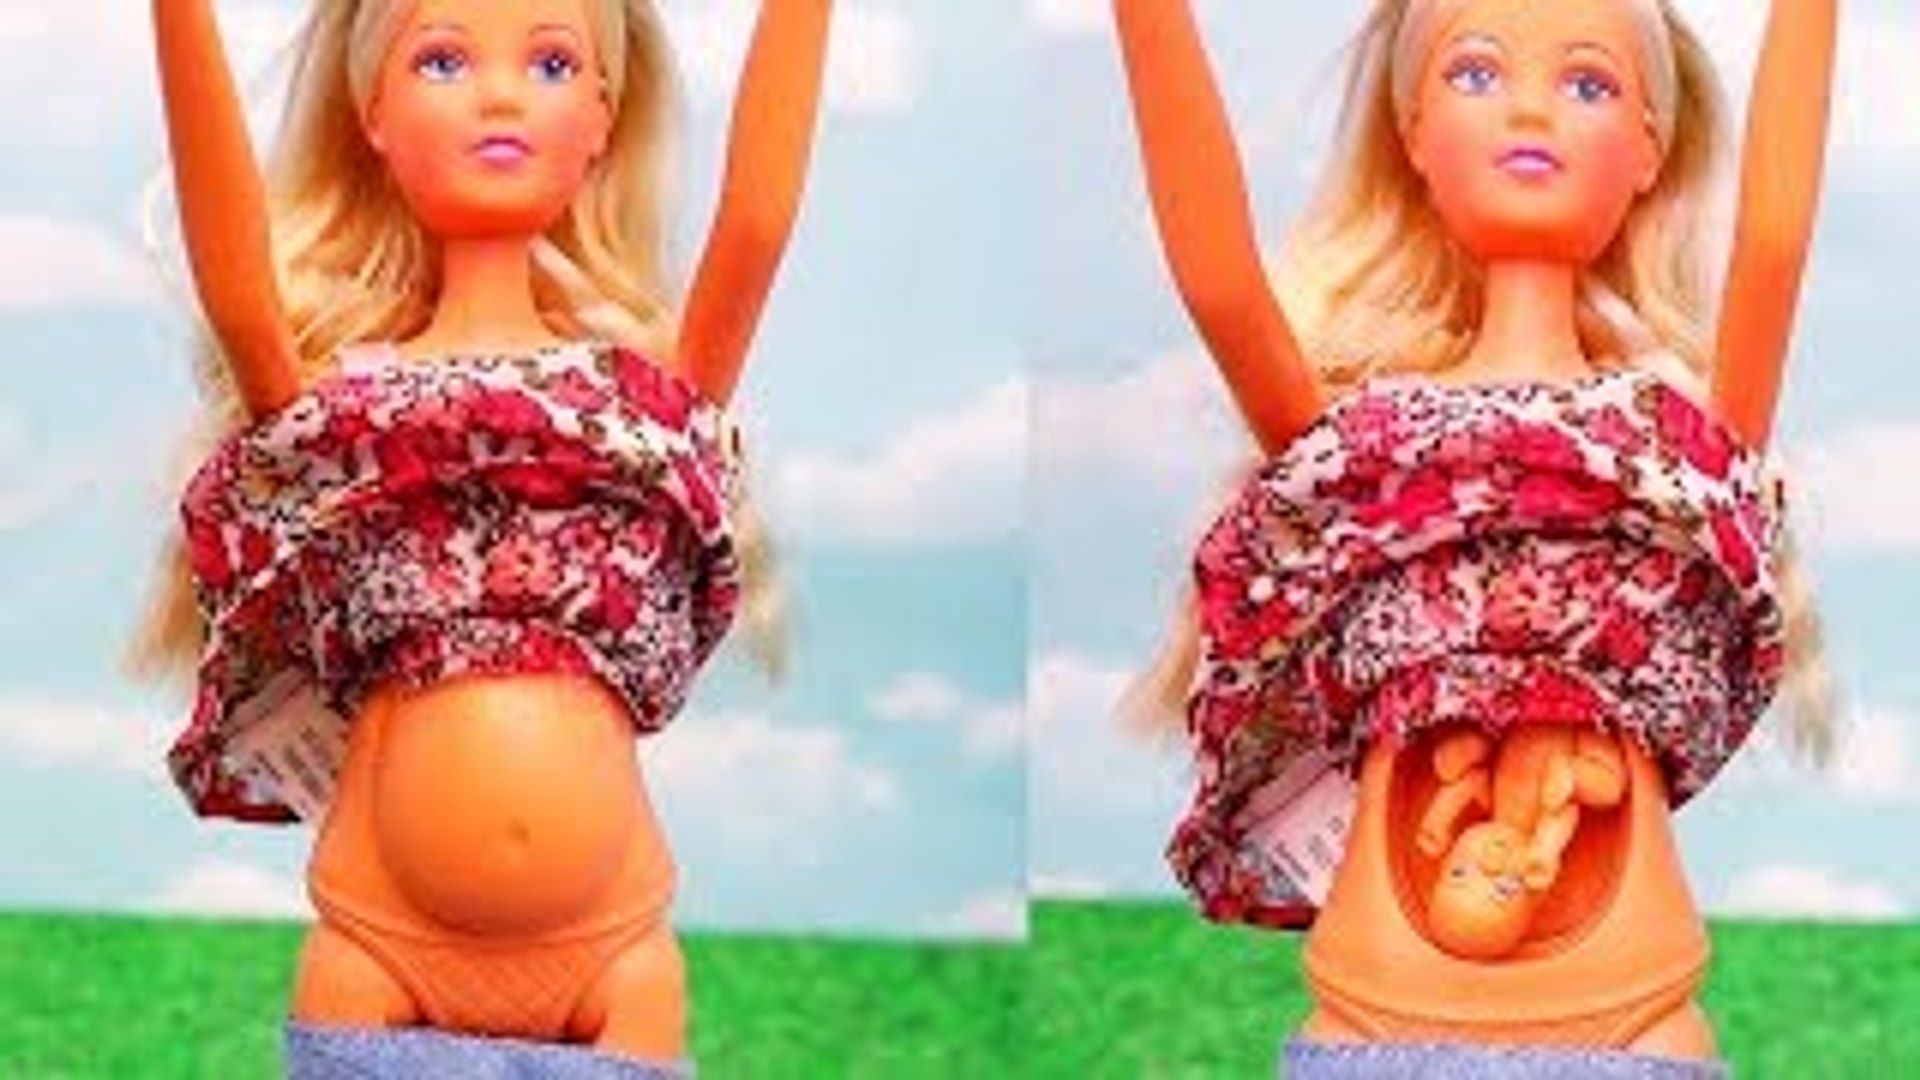 Kids Toys - Pregnant Barbie Doll and Other Rare Barbies From the 80s -  Stories With Toys & Dolls - Dailymotion Video